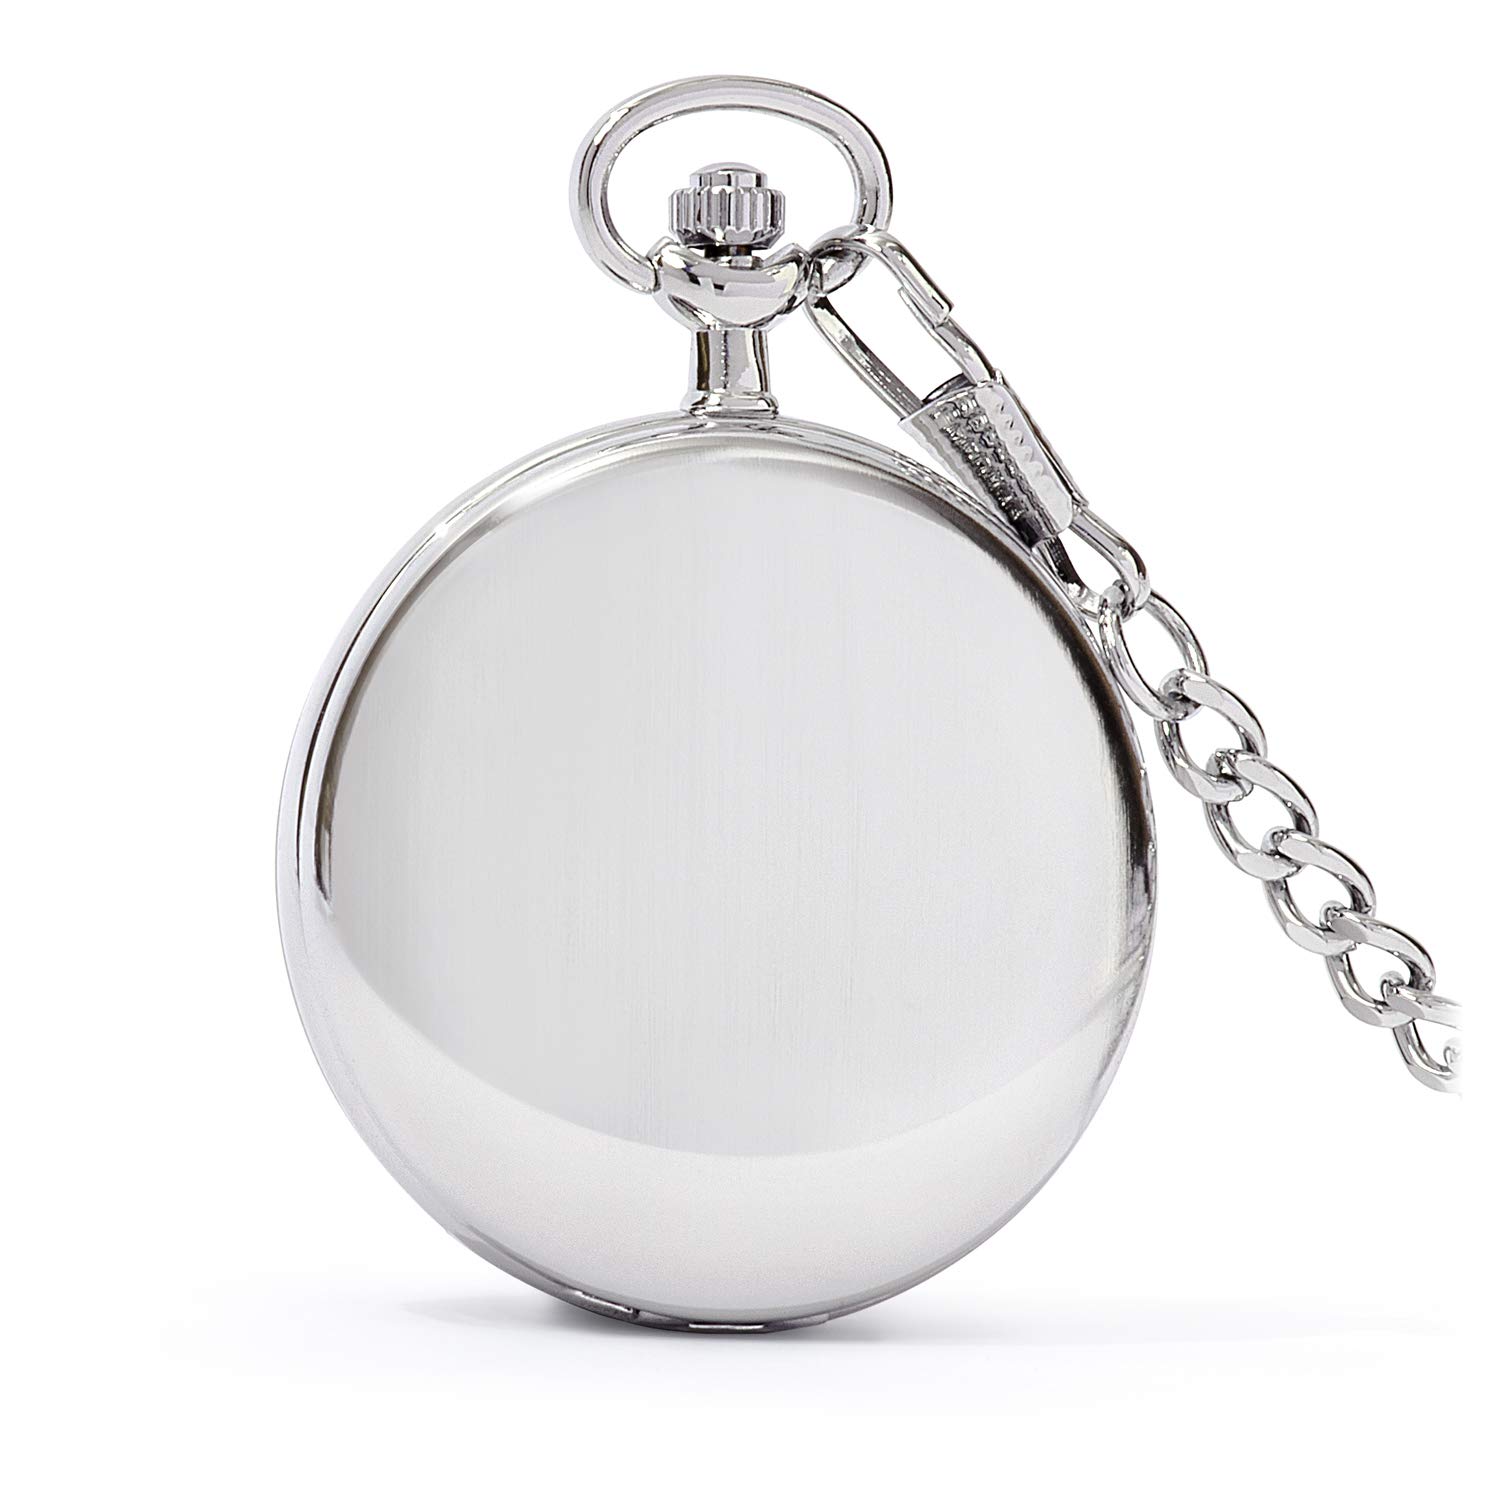 Speidel Classic Brushed Satin Engravable Pocket Watch with 14 inch Chain, Seconds Hand, Day and Date Sub-Dials with Custom Engravable Options